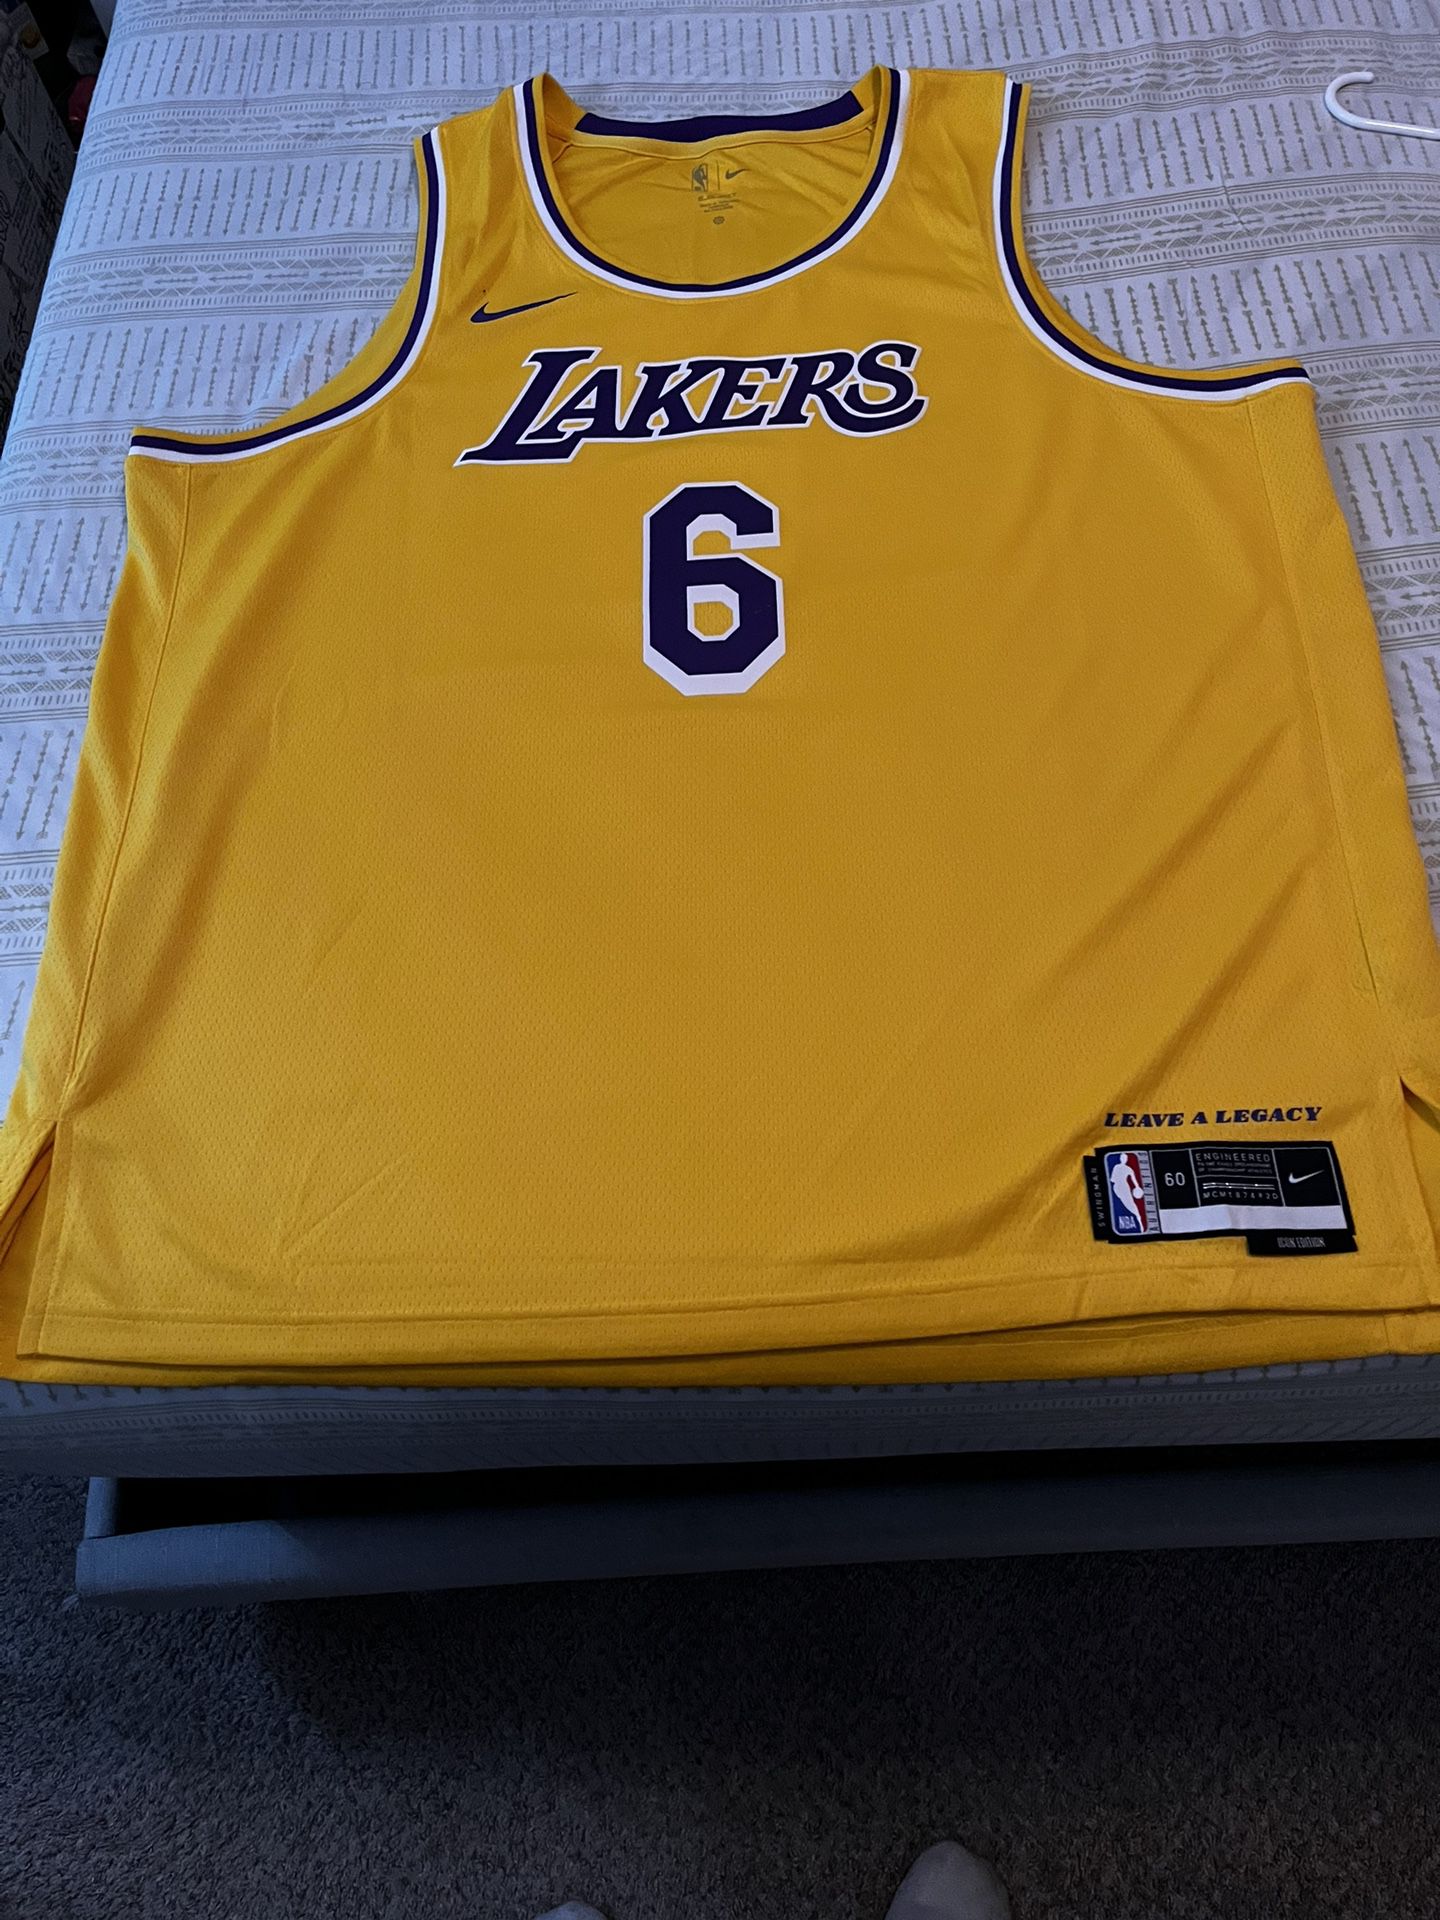 LAKERS JERSEY 